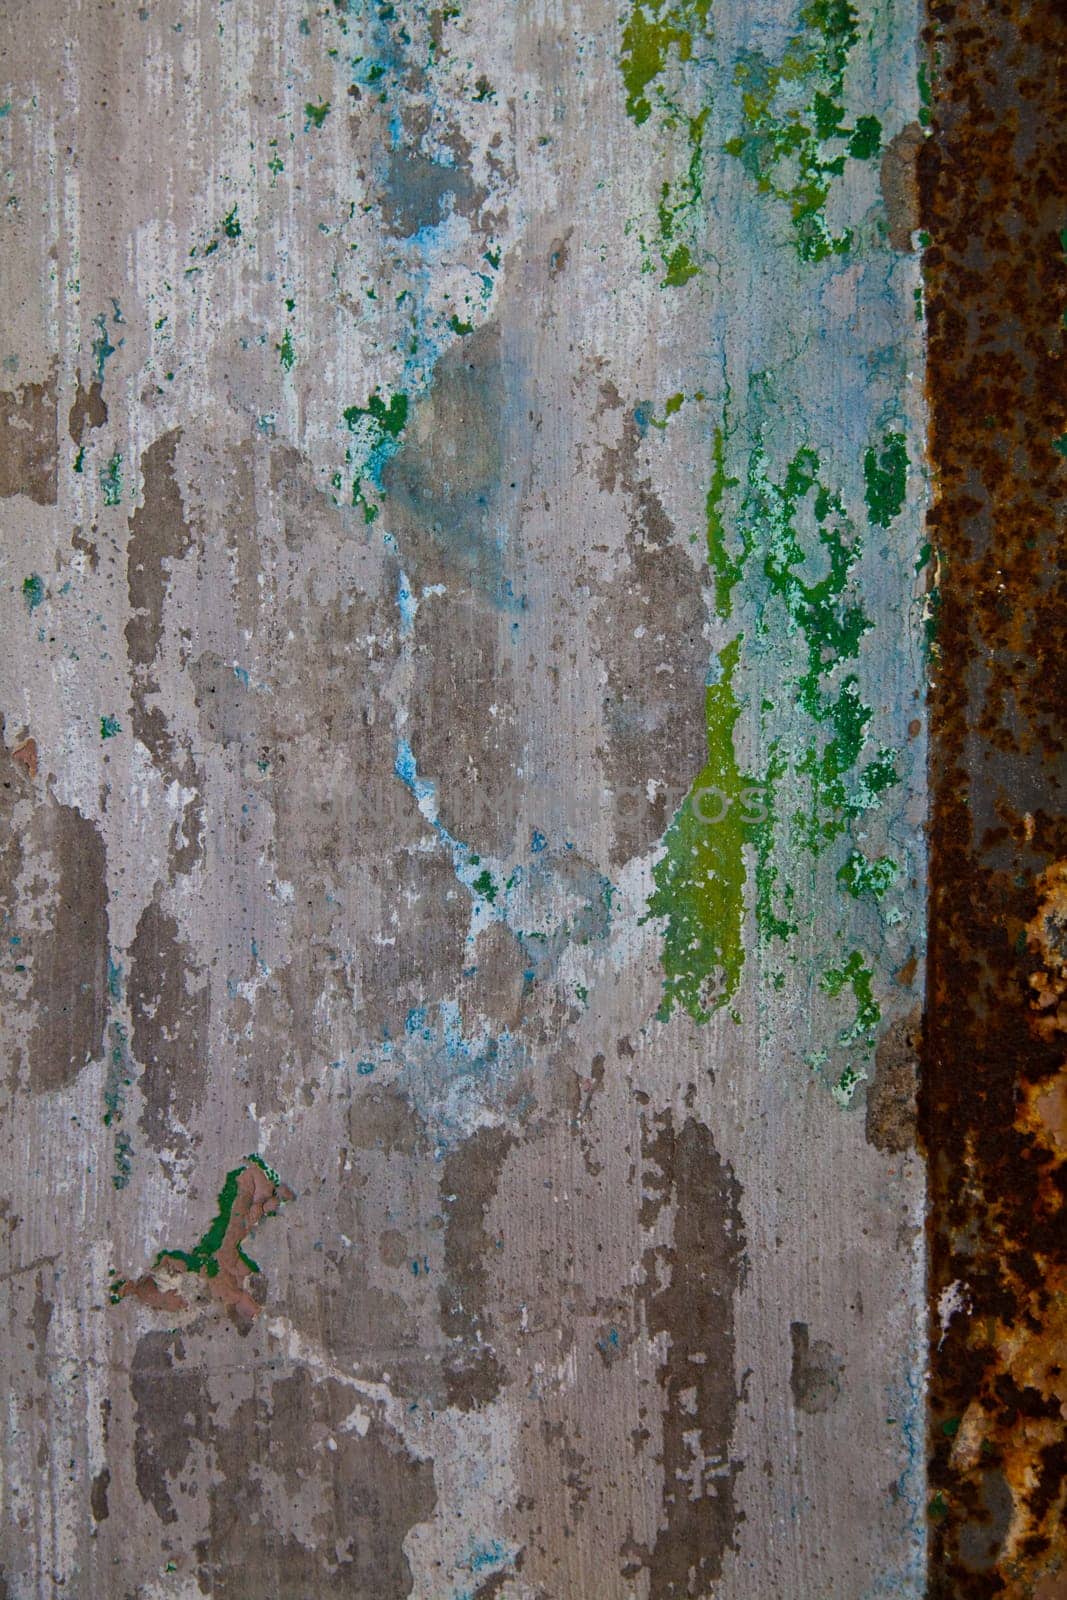 Weathered Metal Surface with Fading Paint and Rust Abandoned Close-Up by njproductions